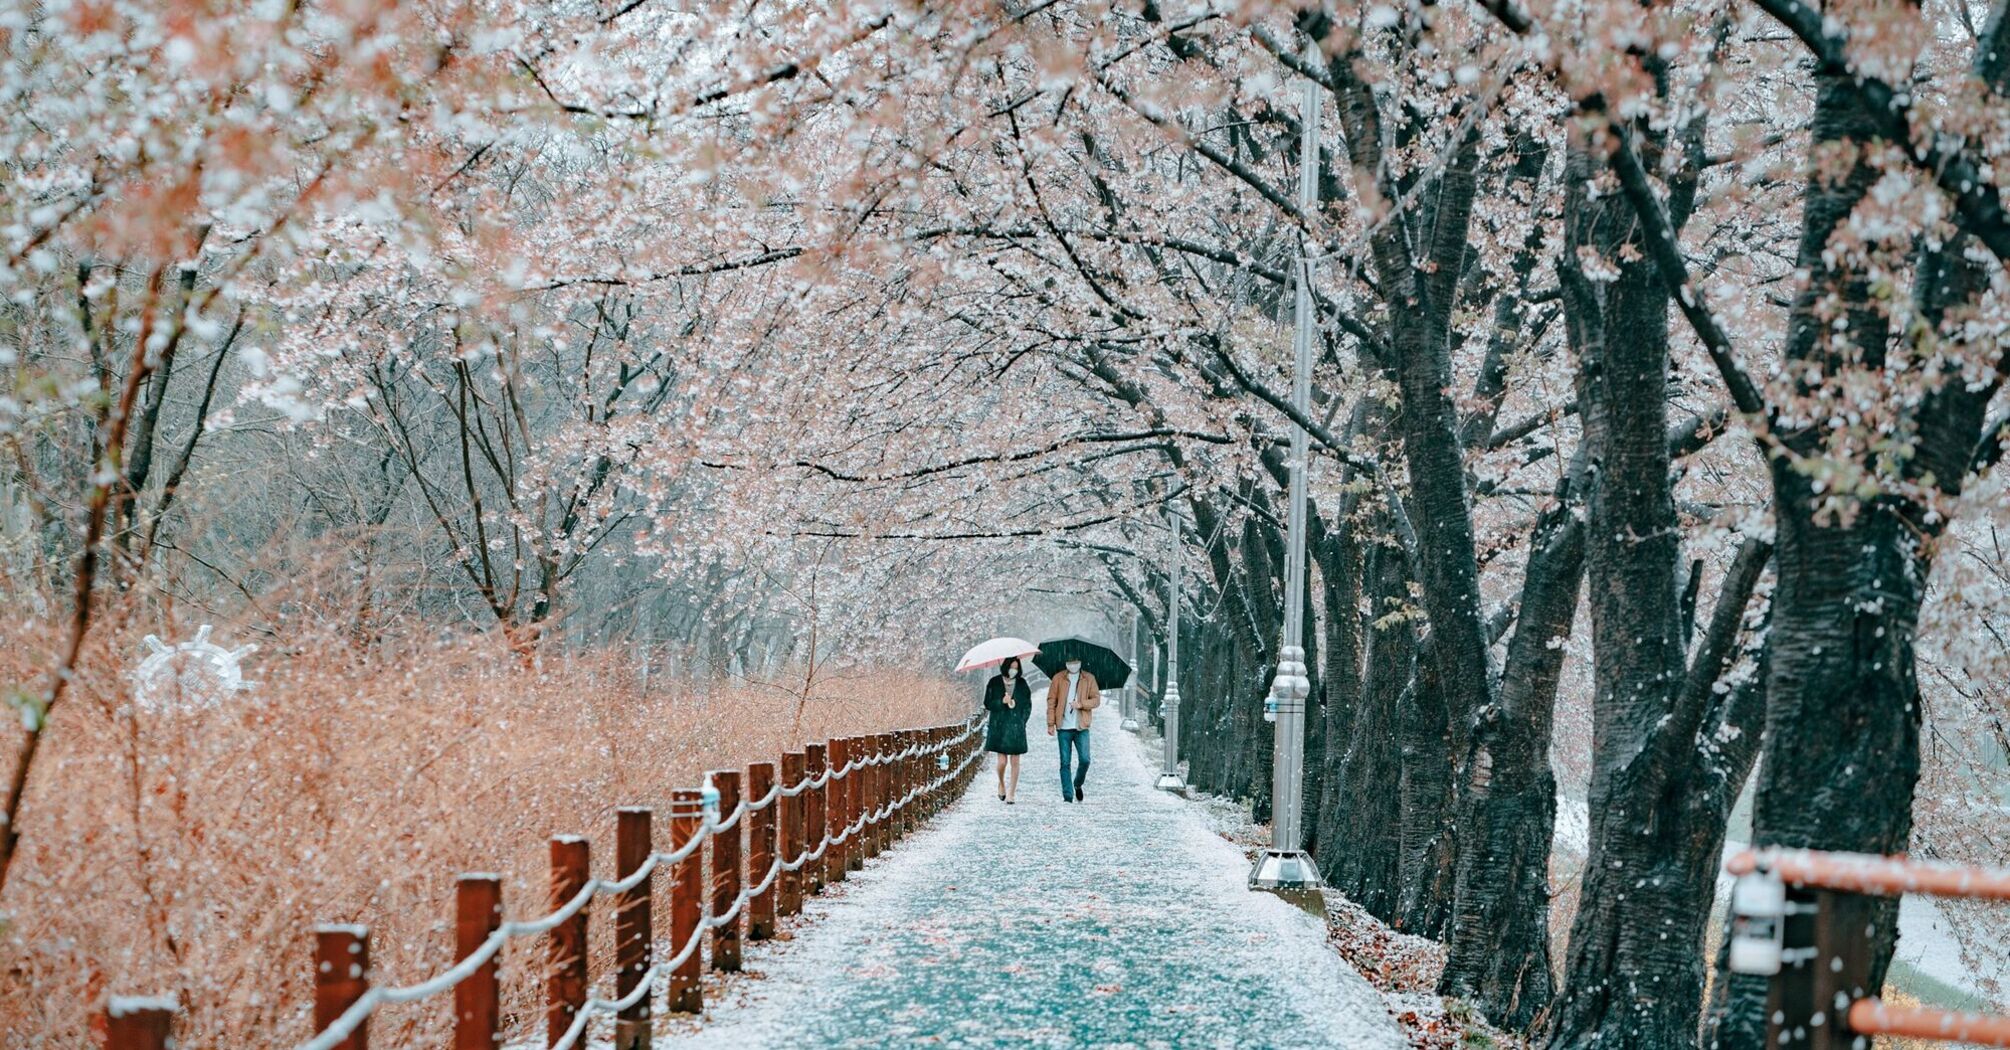 Cherry blossoms gently falling on a snowy path through Yangjae Citizen's Forest in Seoul 